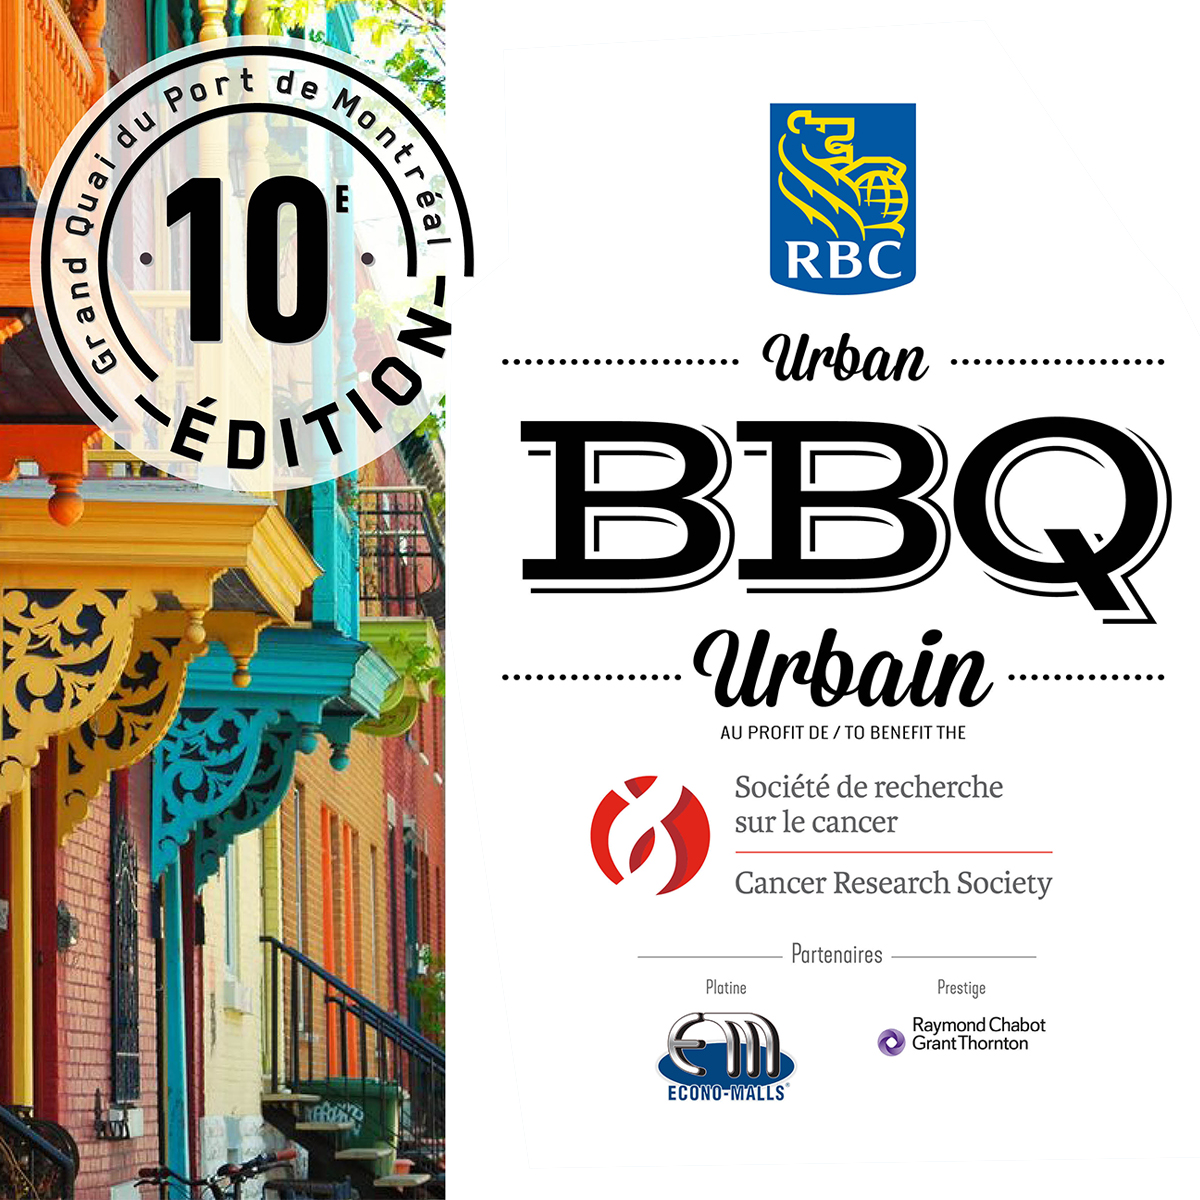 🔥🎉On May 28, join us for the 10th anniversary of the Urban BBQ presented by @RBC Royal Bank to benefit the #CancerResearchSociety: loom.ly/1zNAoRI ❤️A HUGE thank you to RBC, our loyal presenting partner since the very 1st edition!